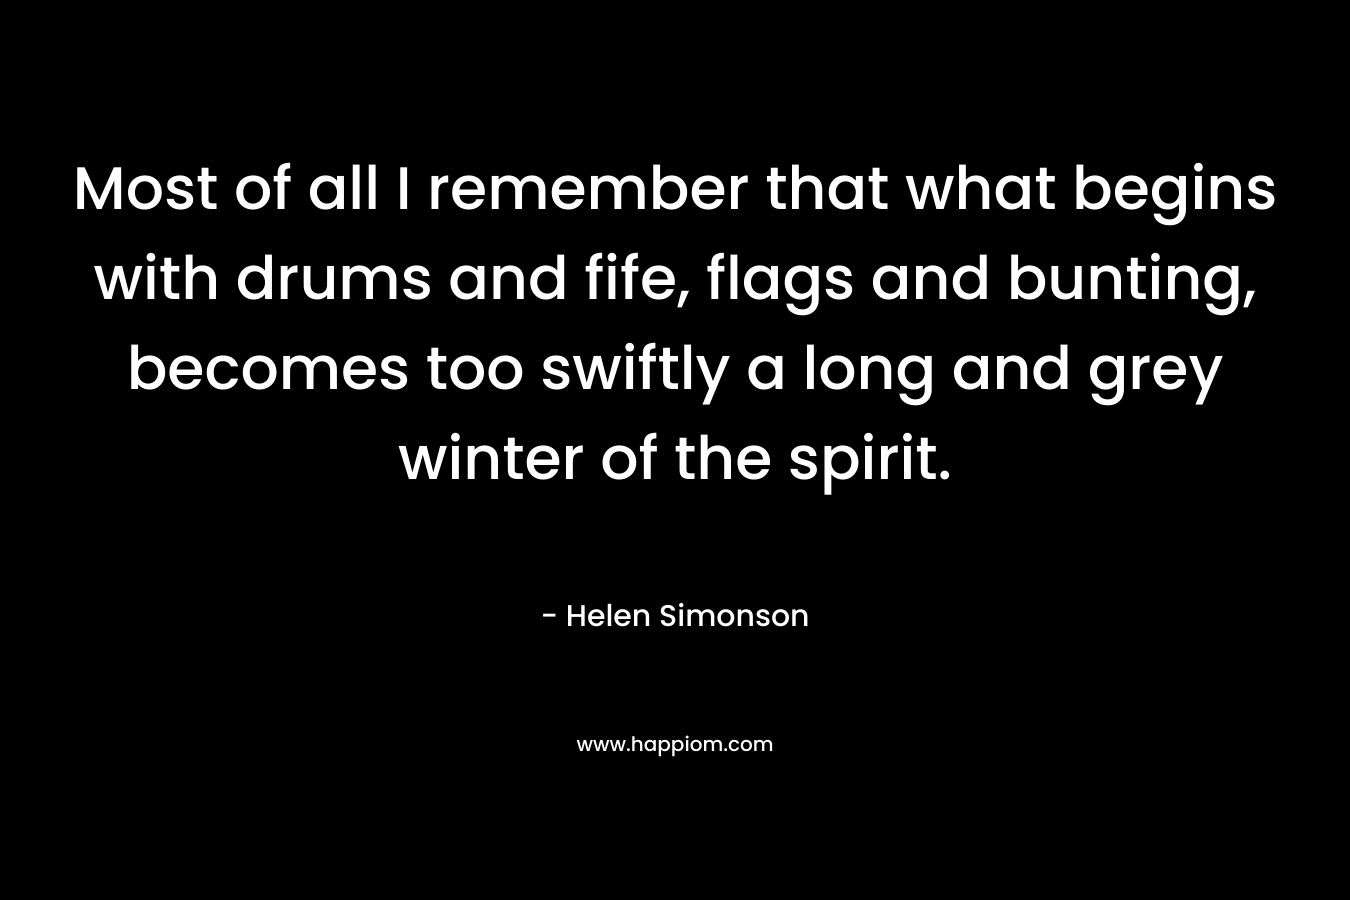 Most of all I remember that what begins with drums and fife, flags and bunting, becomes too swiftly a long and grey winter of the spirit. – Helen Simonson